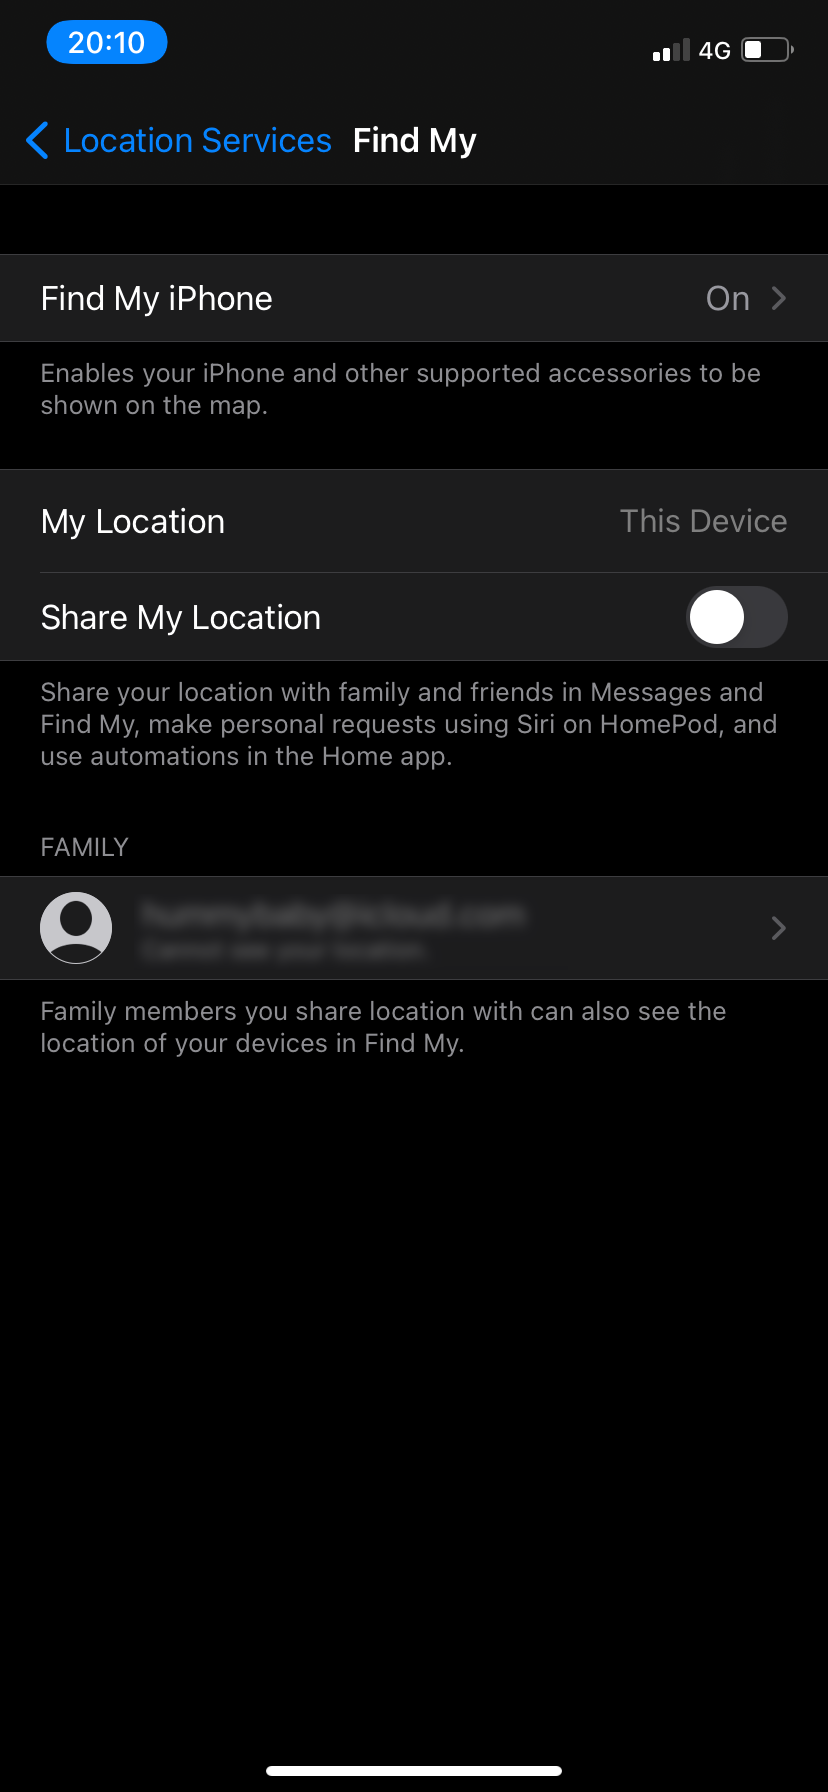 Share My Location settings.